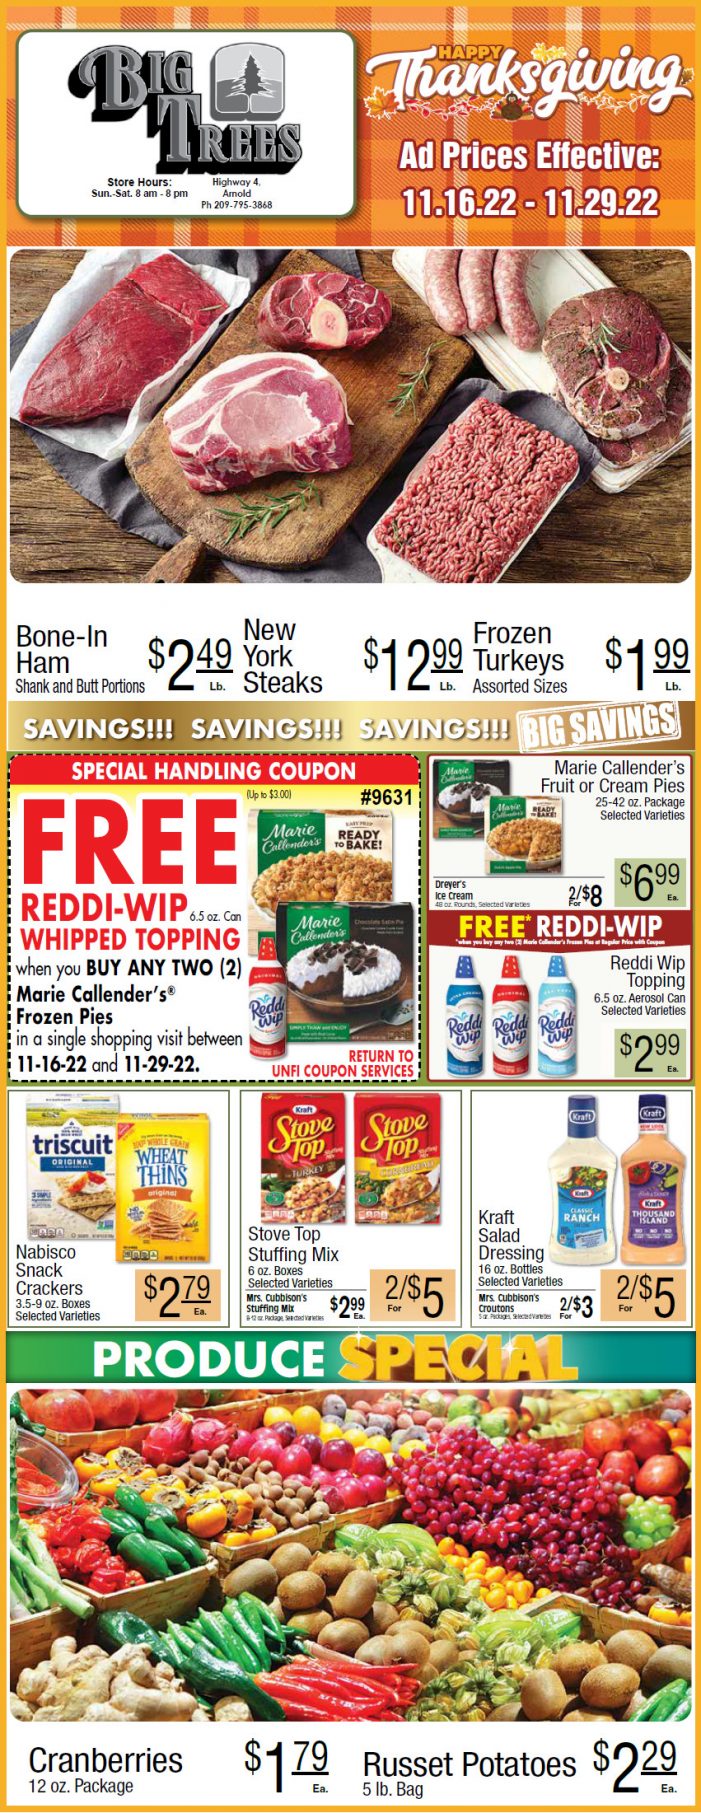 Big Trees Market Thanksgiving Ad & Grocery Specials November 16 ~ 29!  Shop Local & Save!!